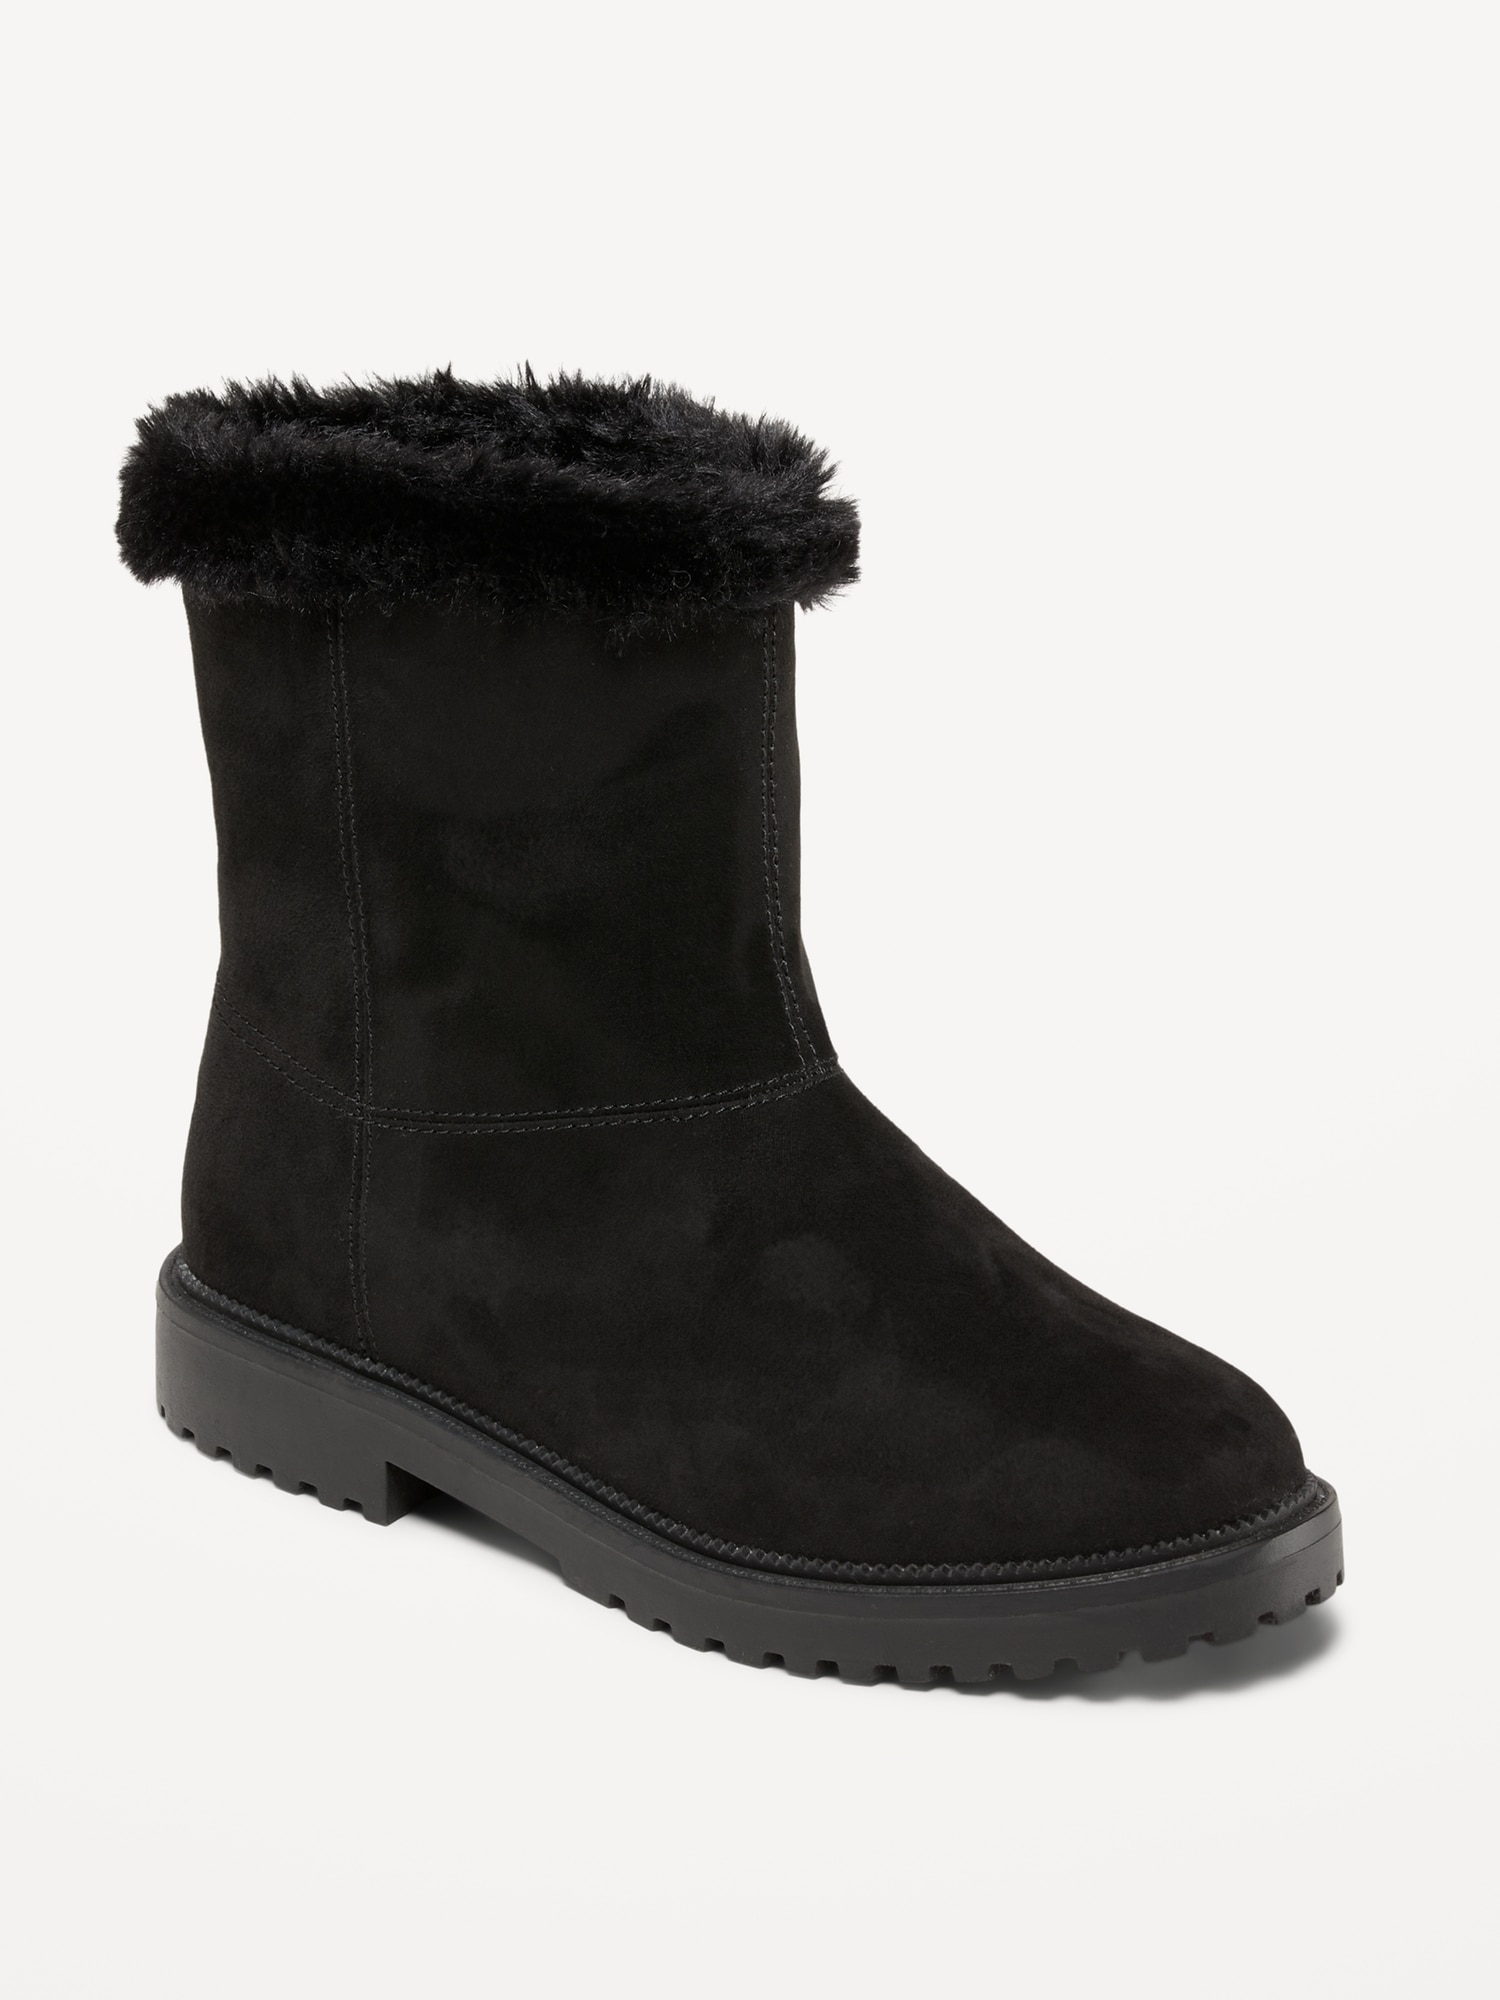 Cozy Faux-Suede Faux-Fur Trim Boots for Girls | Old Navy